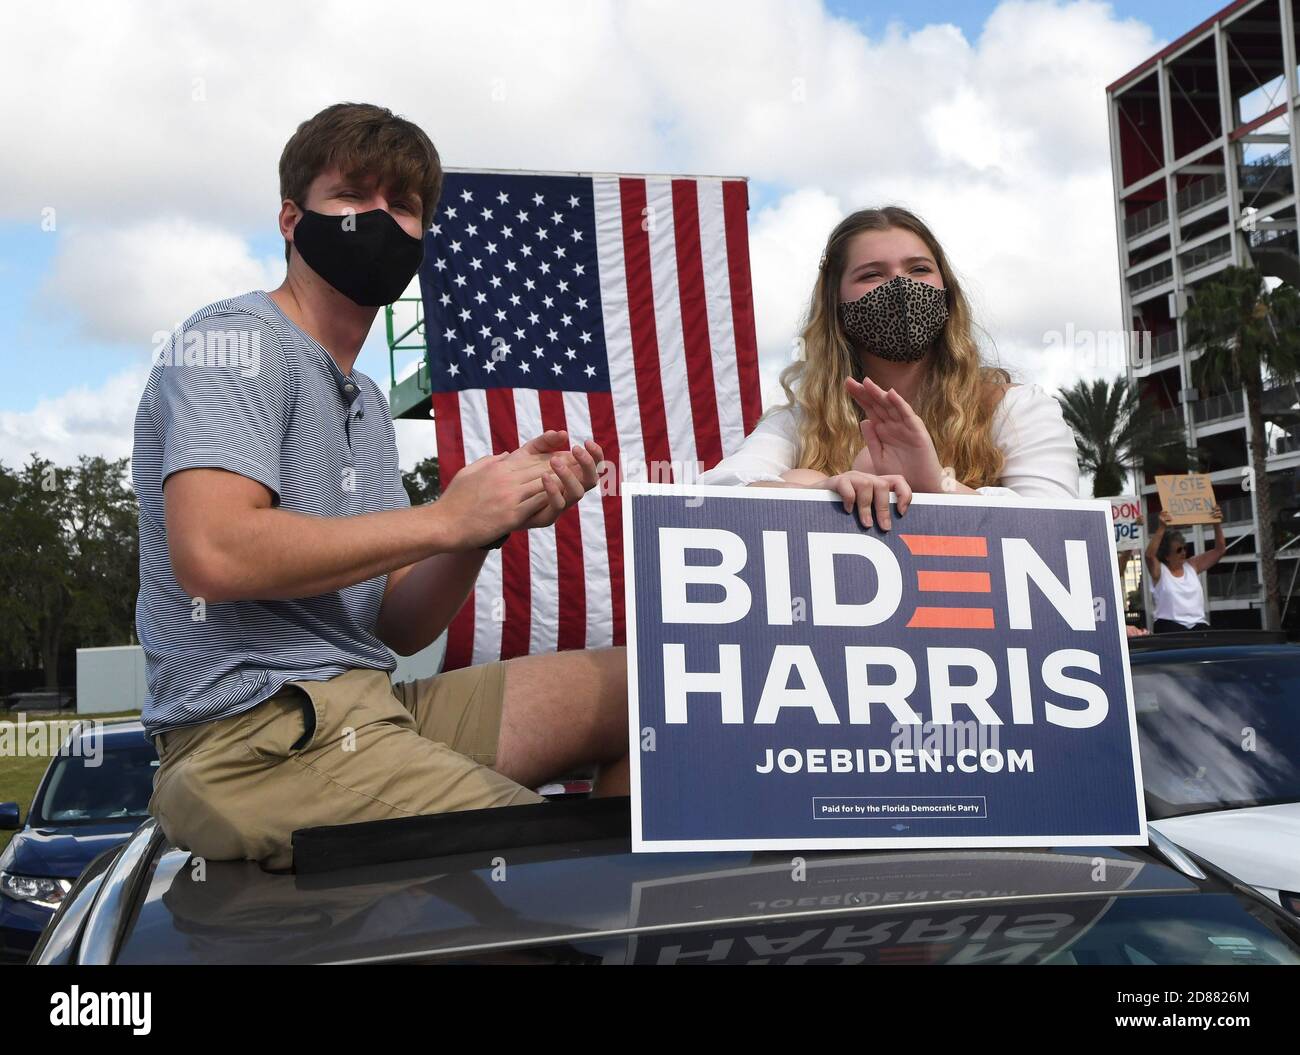 October 27, 2020 - Orlando, Florida, United States - People hold signs while waiting for former U.S. President Barack Obama to speak in support of Democratic presidential nominee Joe Biden during a drive-in rally on October 27, 2020 in Orlando, Florida. Mr. Obama is campaigning for his former Vice President before the Nov. 3rd election. (Paul Hennessy/Alamy) Credit: Paul Hennessy/Alamy Live News Stock Photo